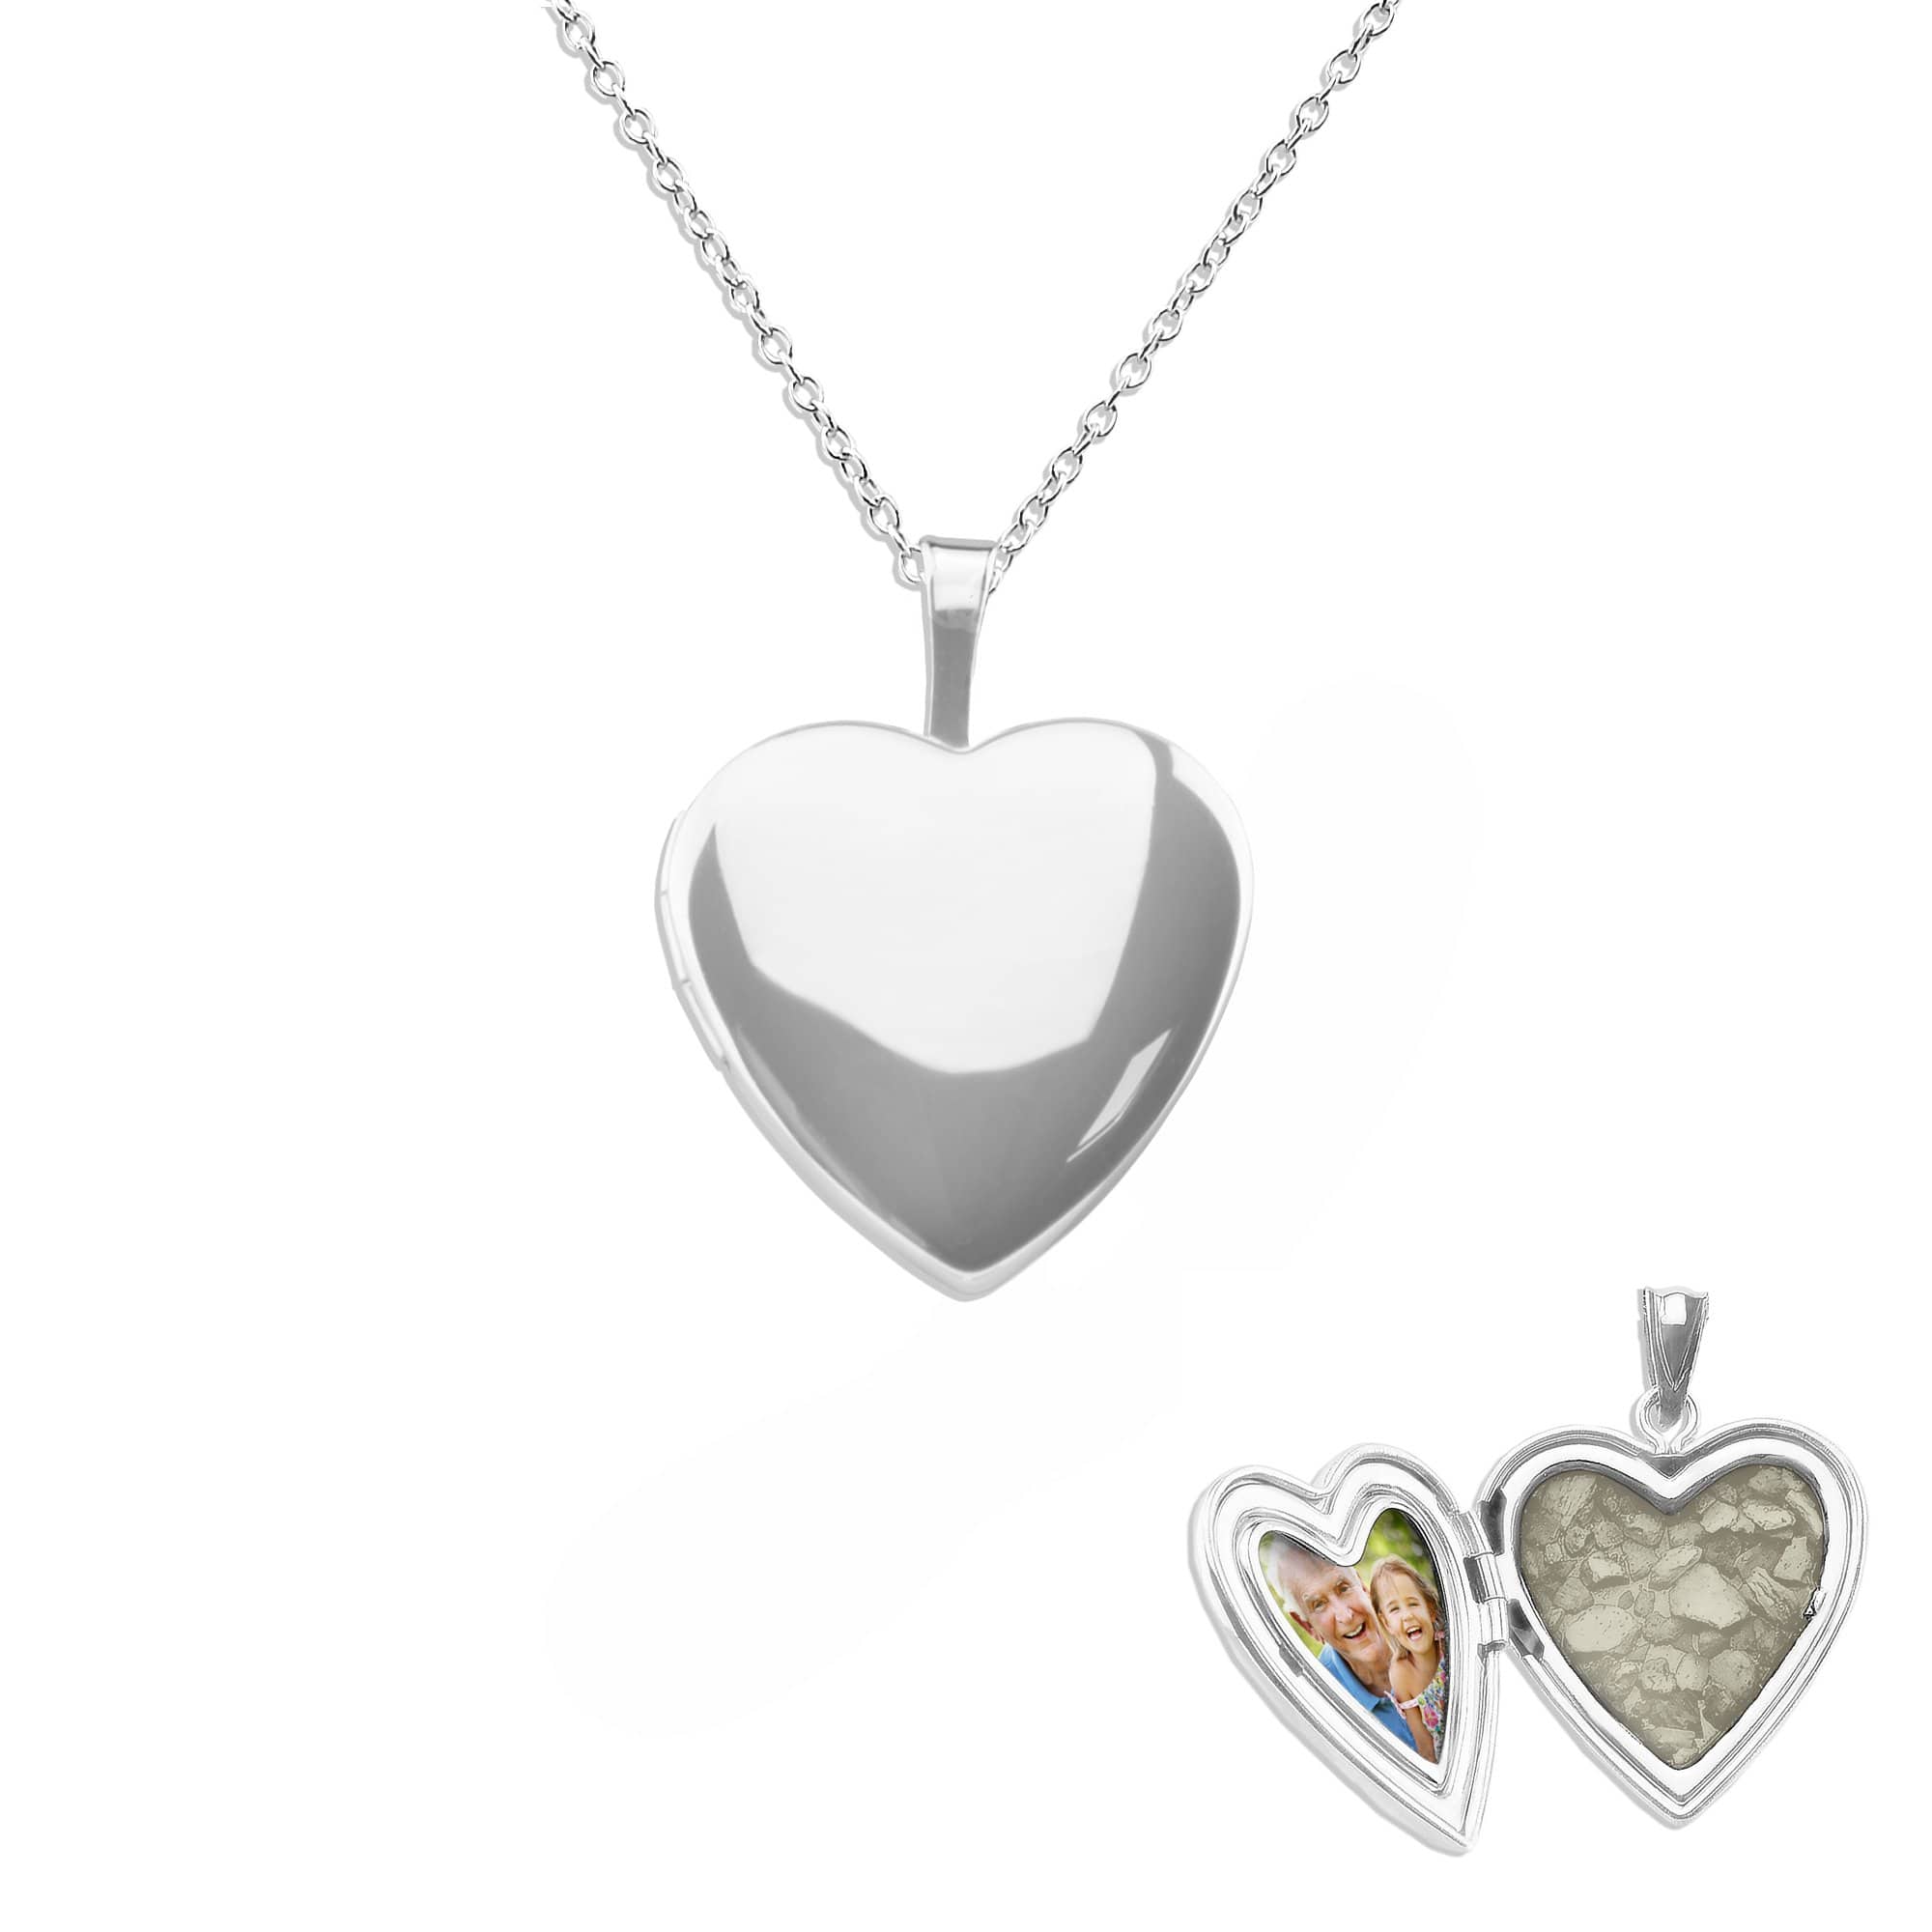 Small Heart Shaped Sterling Silver Memorial Ashes Locket